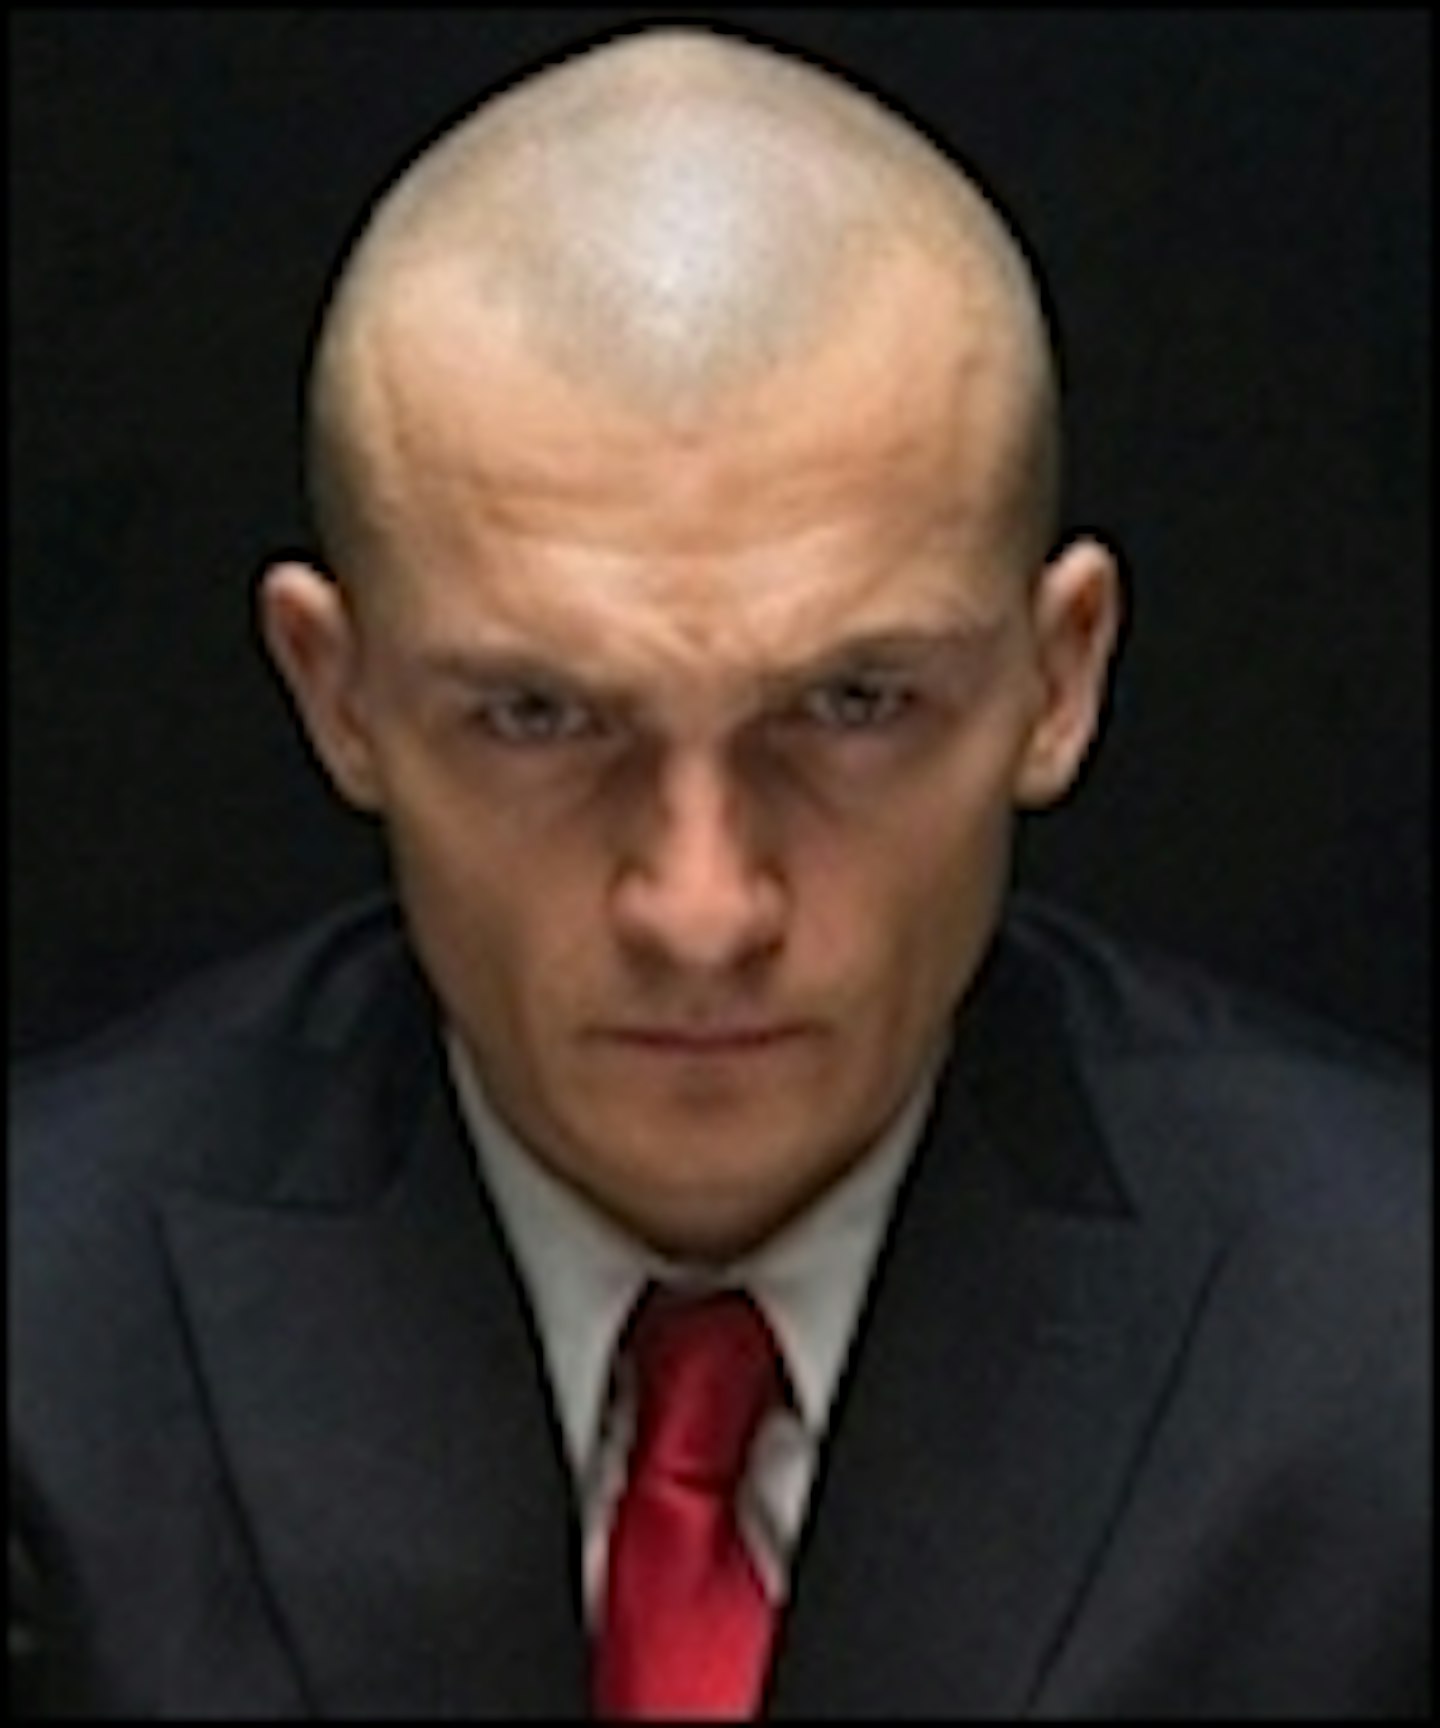 Hitman: Agent 47 Trailer Shoots To Thrill